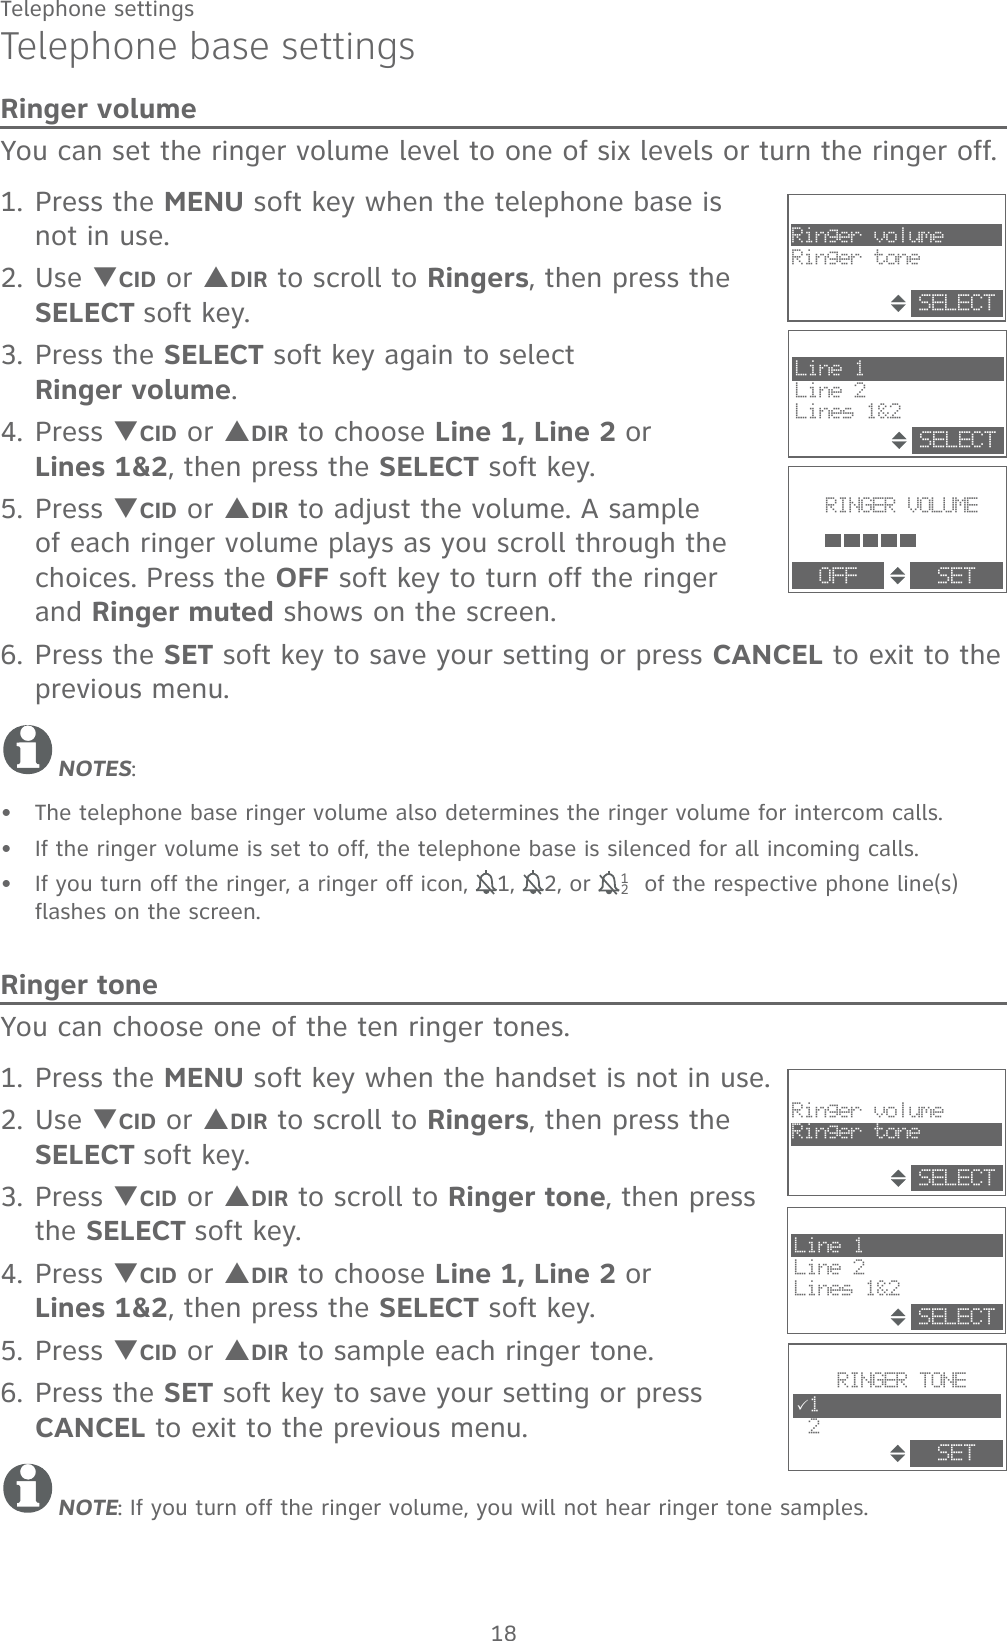 18Telephone settingsTelephone base settingsRinger volumeYou can set the ringer volume level to one of six levels or turn the ringer off. 1. Press the MENU soft key when the telephone base is not in use.2. Use TCID or SDIR to scroll to Ringers, then press the SELECT soft key.3. Press the SELECT soft key again to select            Ringer volume.4. Press TCID or SDIR to choose Line 1, Line 2 or      Lines 1&amp;2, then press the SELECT soft key.5. Press TCID or SDIR to adjust the volume. A sample of each ringer volume plays as you scroll through the choices. Press the OFF soft key to turn off the ringer and Ringer muted shows on the screen.6. Press the SET soft key to save your setting or press CANCEL to exit to the previous menu.NOTES:The telephone base ringer volume also determines the ringer volume for intercom calls.If the ringer volume is set to off, the telephone base is silenced for all incoming calls.If you turn off the ringer, a ringer off icon, 11, 12, or  121 of the respective phone line(s) flashes on the screen. Ringer toneYou can choose one of the ten ringer tones.1. Press the MENU soft key when the handset is not in use.2. Use TCID or SDIR to scroll to Ringers, then press the SELECT soft key.3. Press TCID or SDIR to scroll to Ringer tone, then press the SELECT soft key.4. Press TCID or SDIR to choose Line 1, Line 2 or      Lines 1&amp;2, then press the SELECT soft key. 5. Press TCID or SDIR to sample each ringer tone.6. Press the SET soft key to save your setting or press CANCEL to exit to the previous menu.NOTE: If you turn off the ringer volume, you will not hear ringer tone samples.•••RINGER VOLUMEOFF SETRinger volumeRinger toneSELECTLine 1Line 2Lines 1&amp;2SELECTRINGER TONE31 2SETRinger volumeRinger toneSELECTLine 1Line 2Lines 1&amp;2SELECT